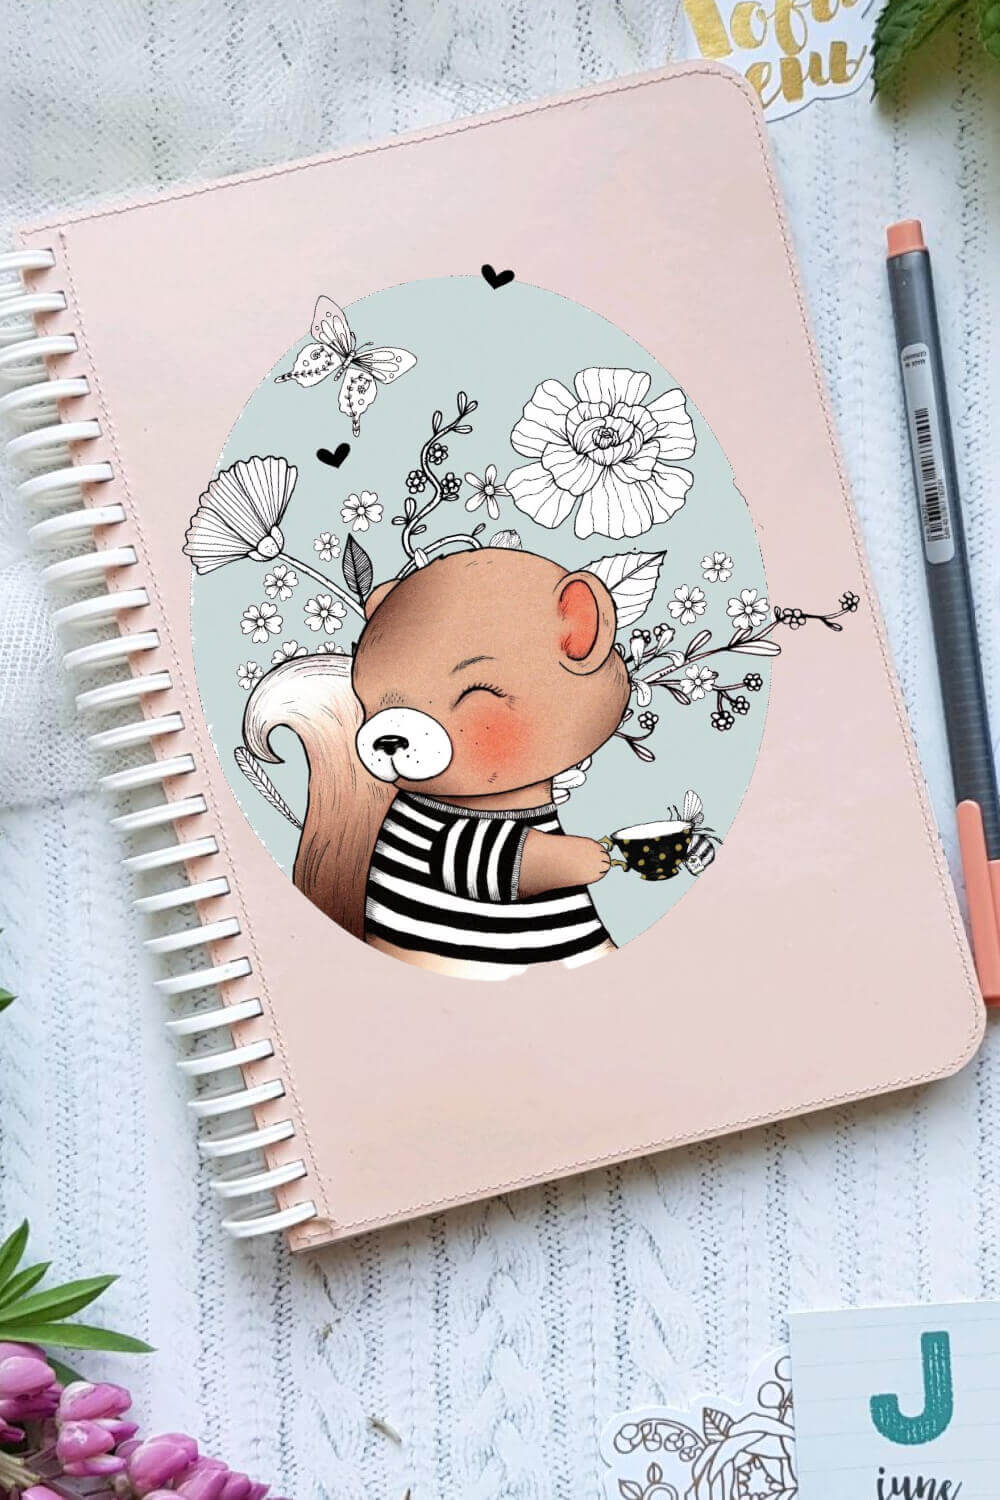 Pink notepad with colored squirrel pattern and black and white flowers.